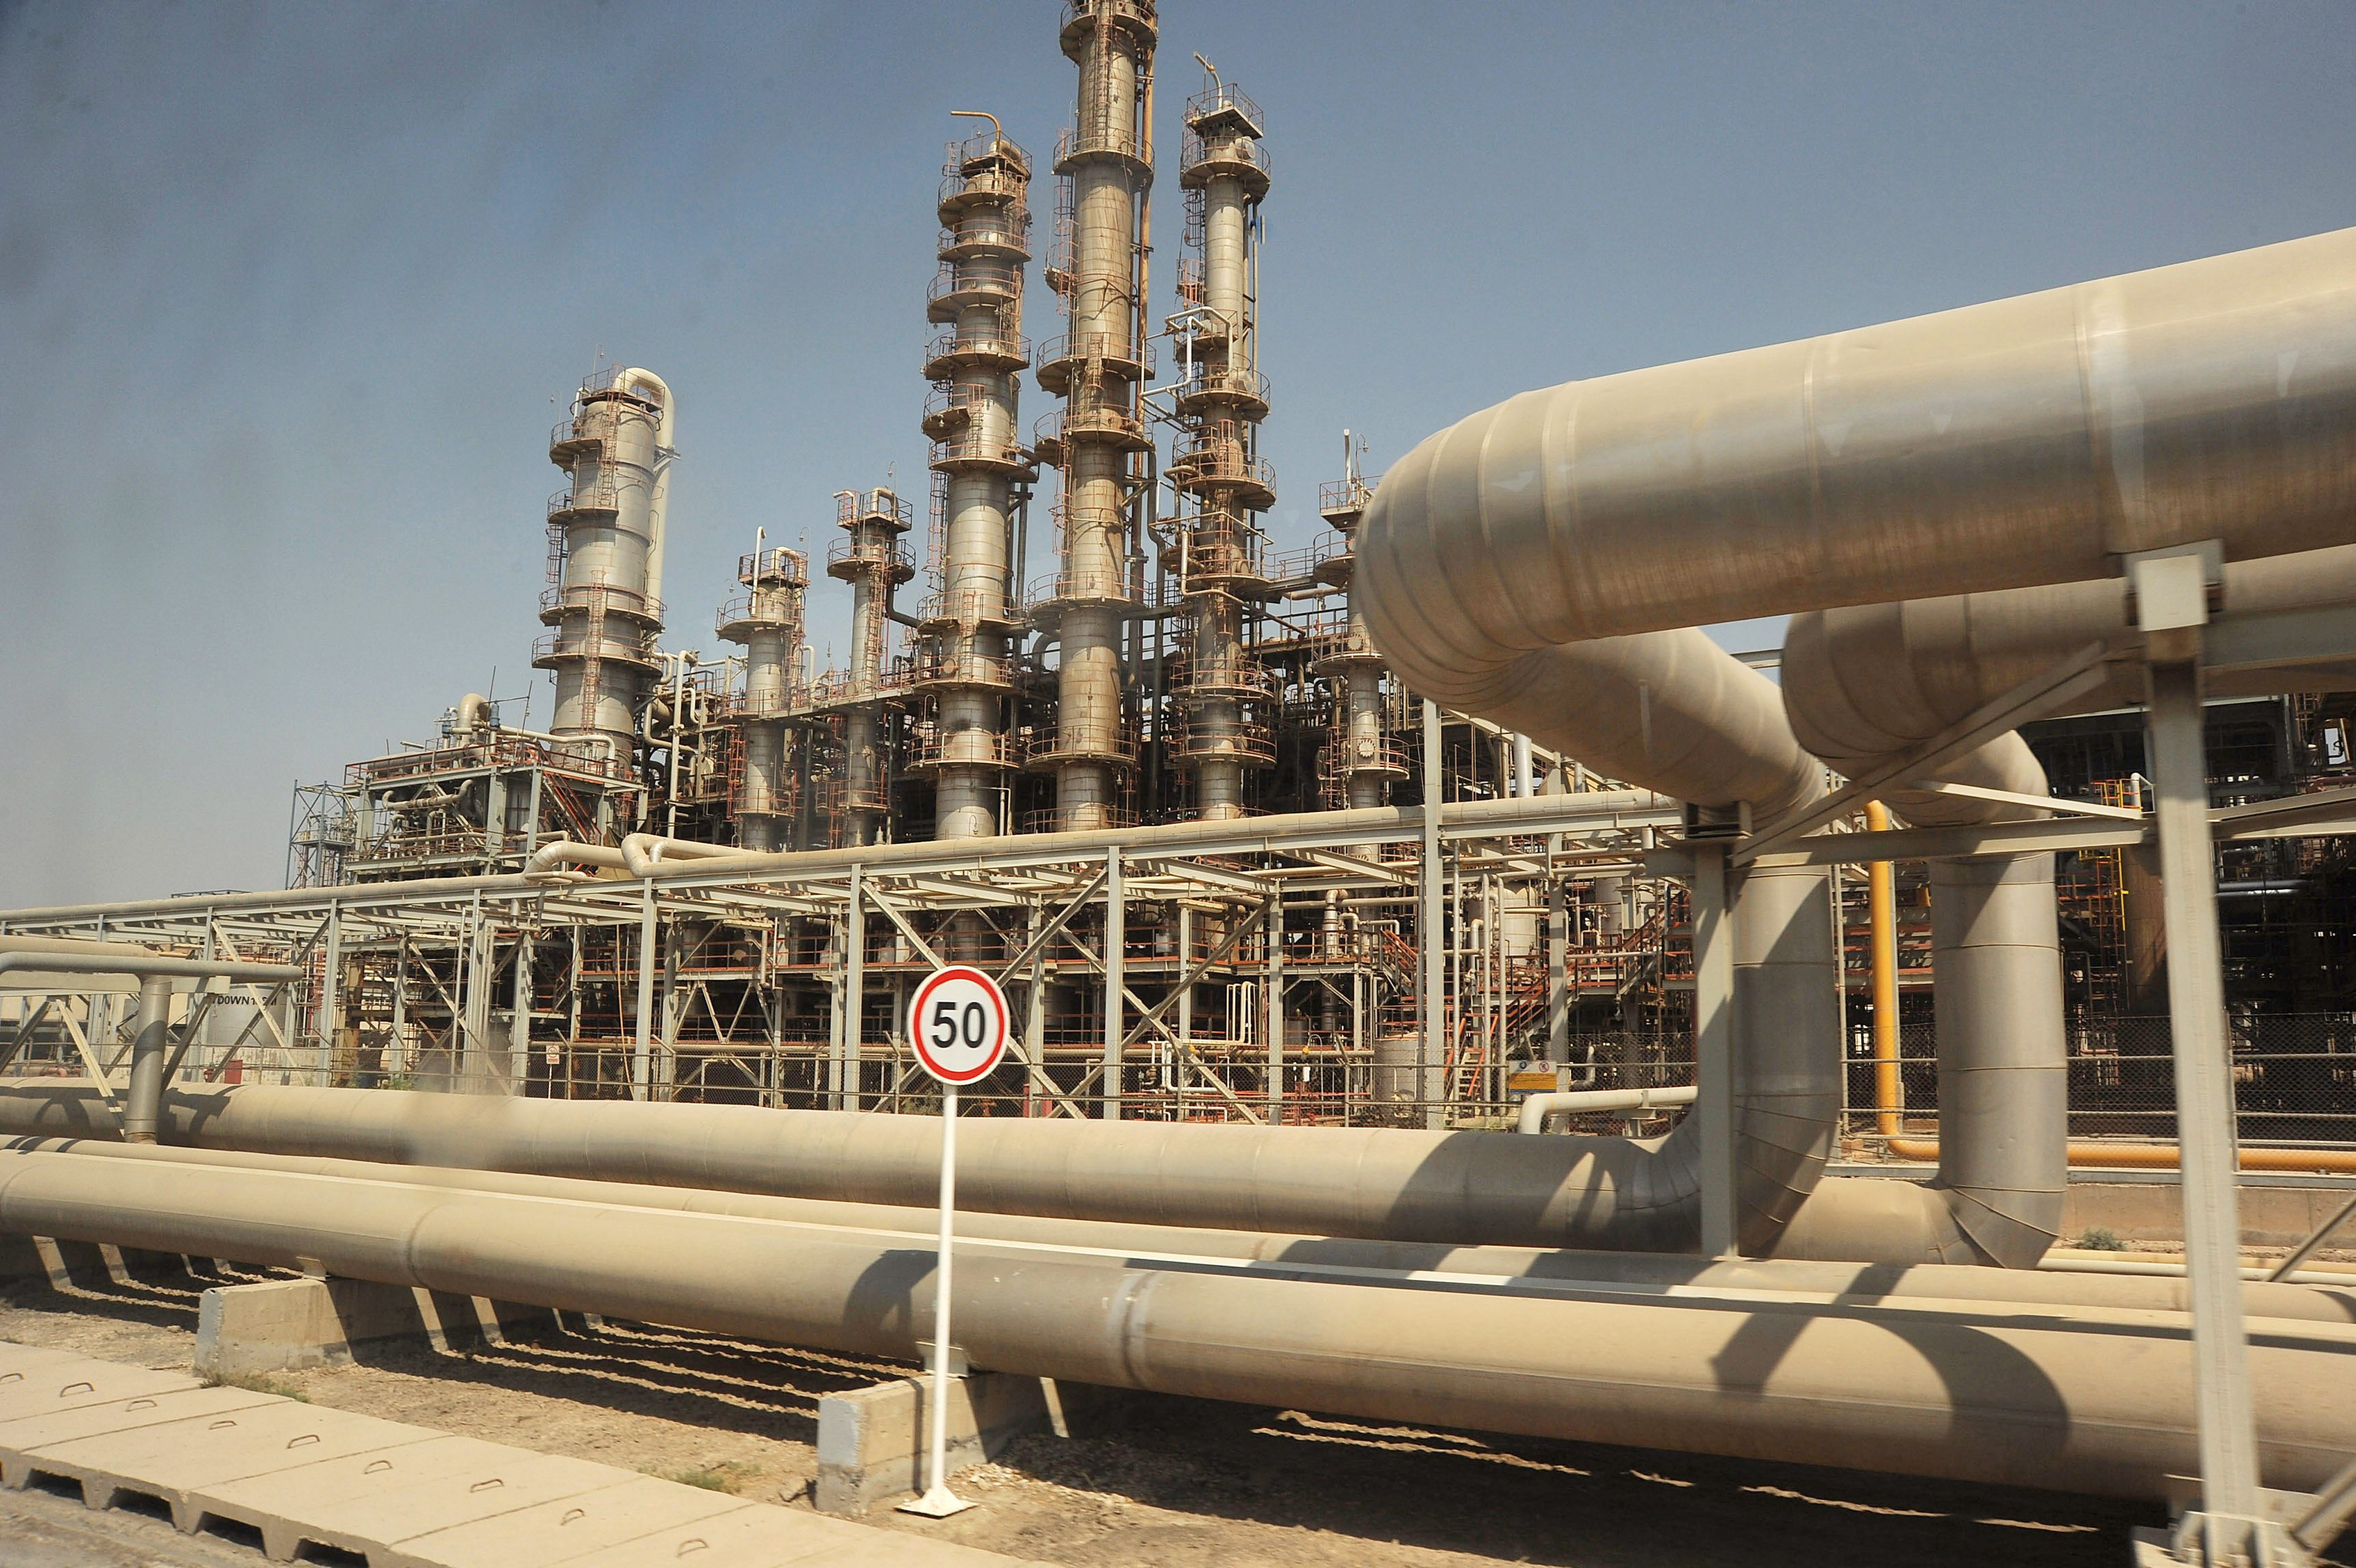 View of Iran's oil industry installations on September 28, 2011 in Mahshahr, Khuzestan province, southern Iran. (Kaveh Kazemi—Getty Images)